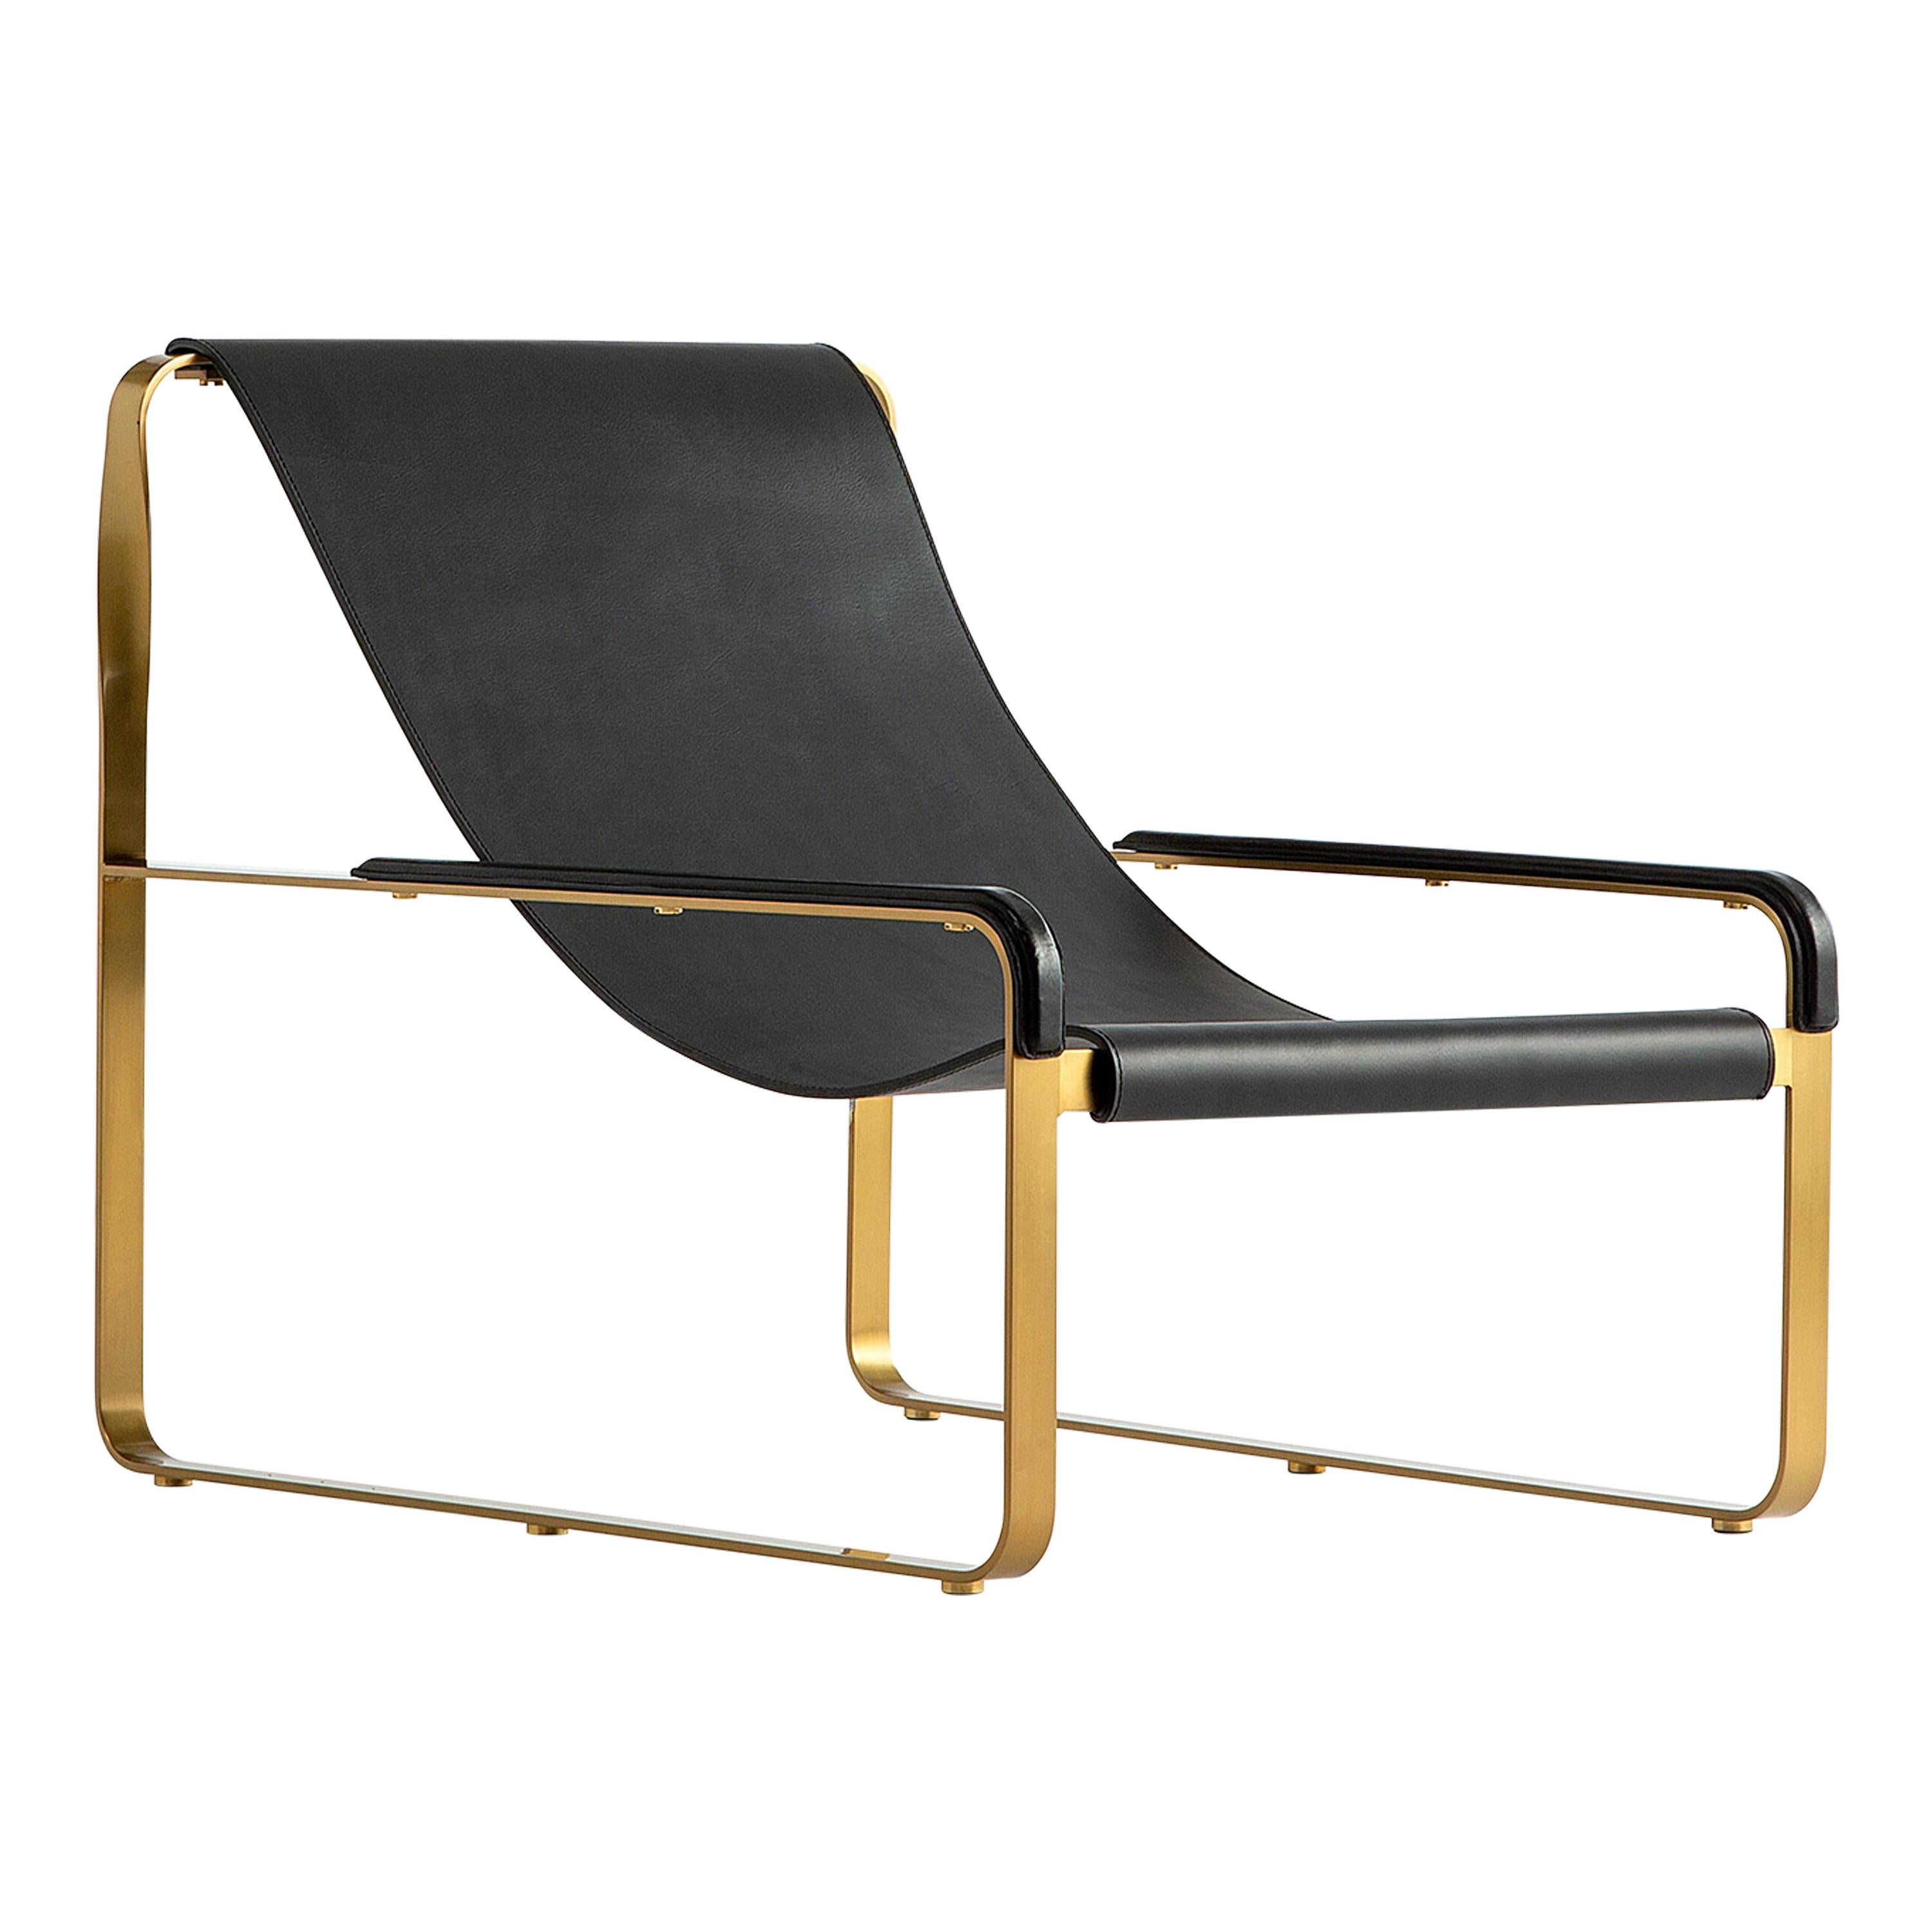 Classic Contemporary Artisan Handmade Chaise Lounge Brass Metal & Black Leather For Sale